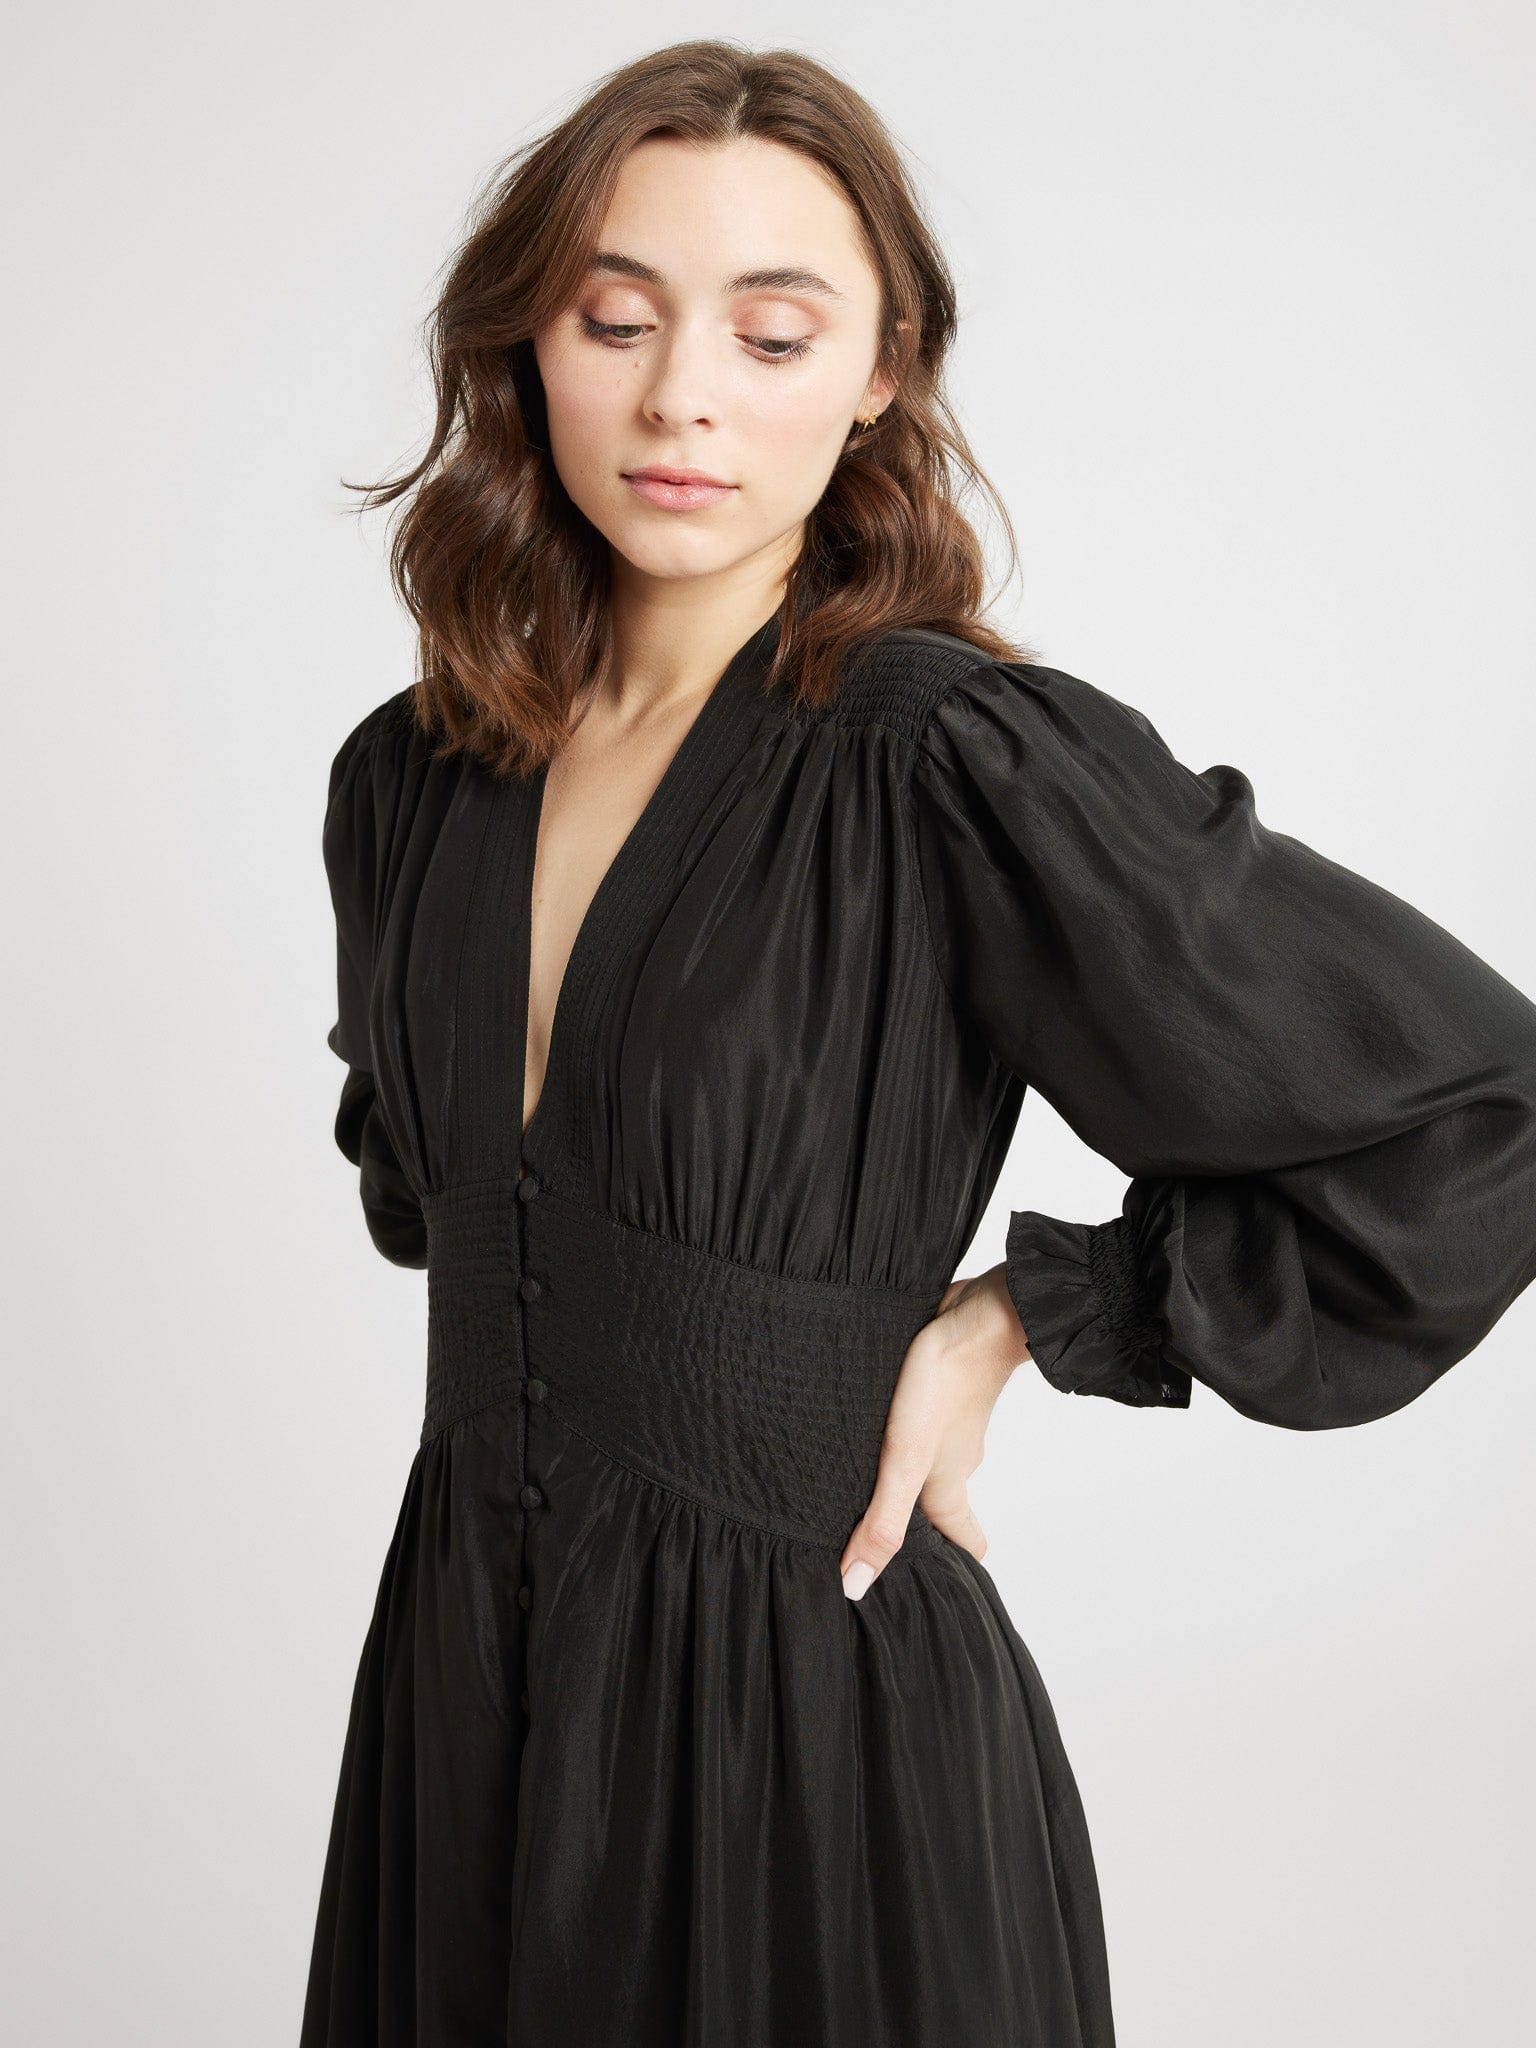 MILLE Clothing Anya Dress in Black Washed Silk